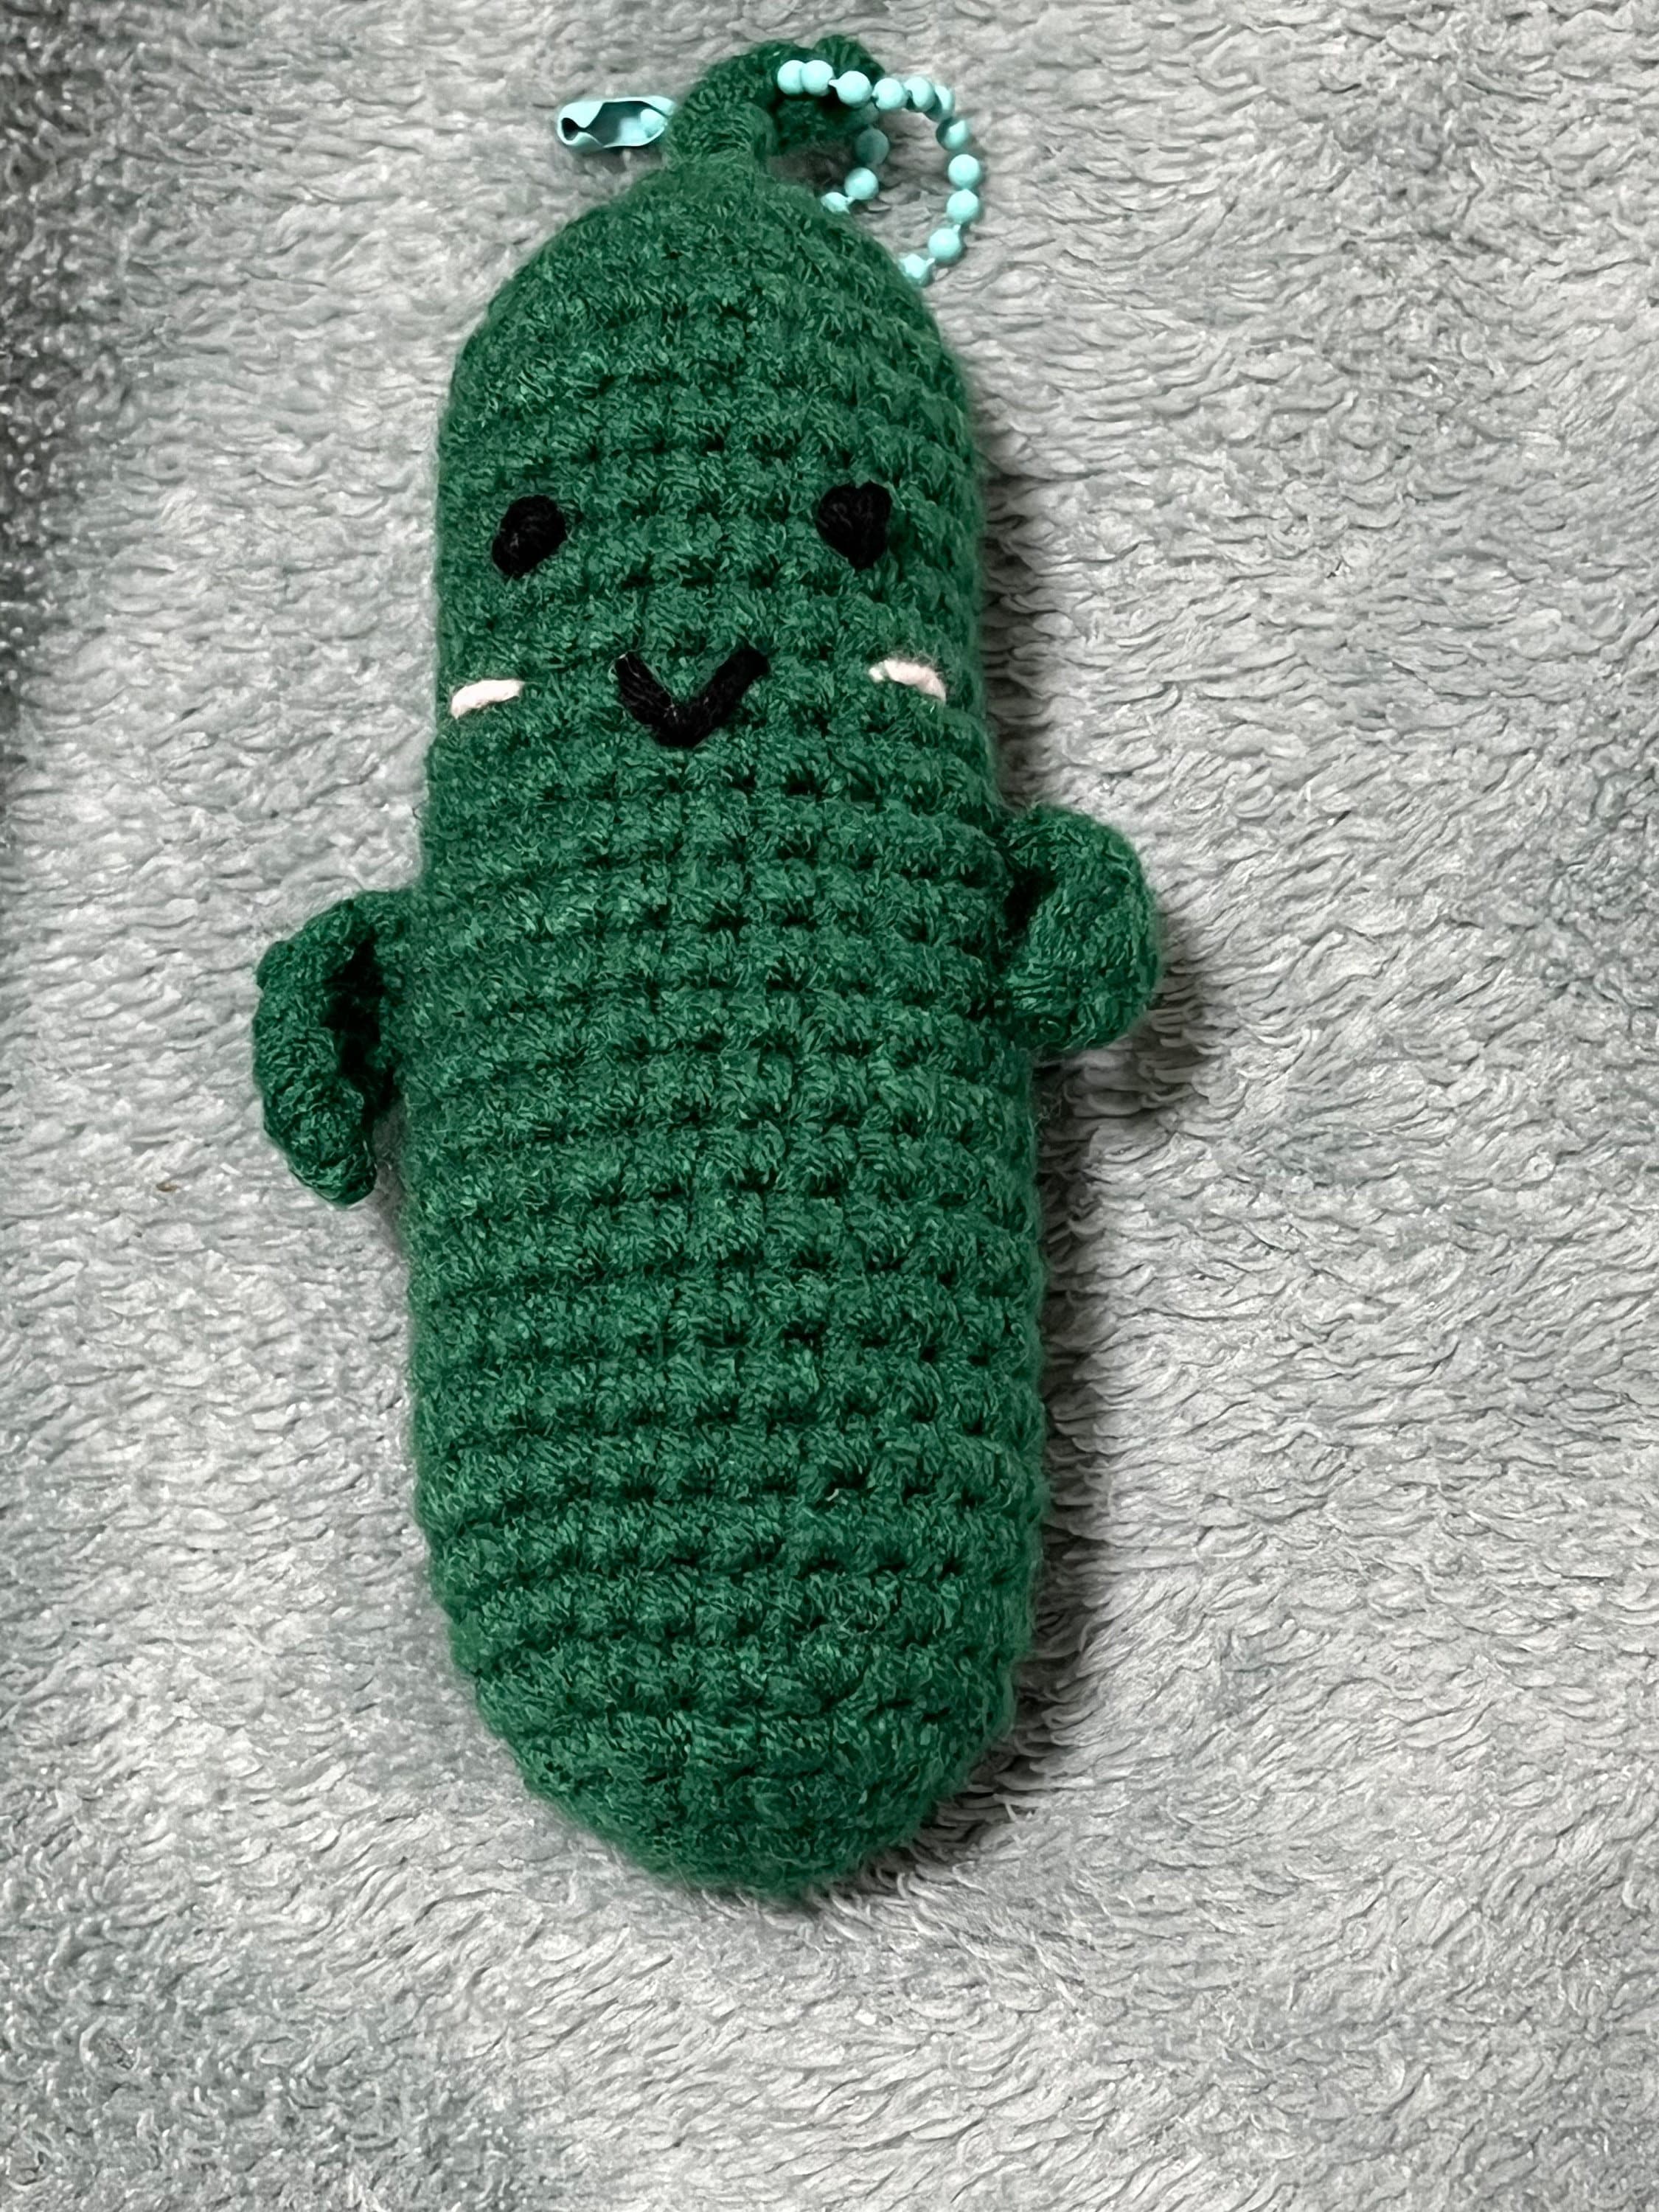 Emotional Support Pickle & Positive Poo Pattern Bundle,us Terms, Handmade  Funny Gift, Crochet Cucumber With Affirmation, Kind of A Big Dill 